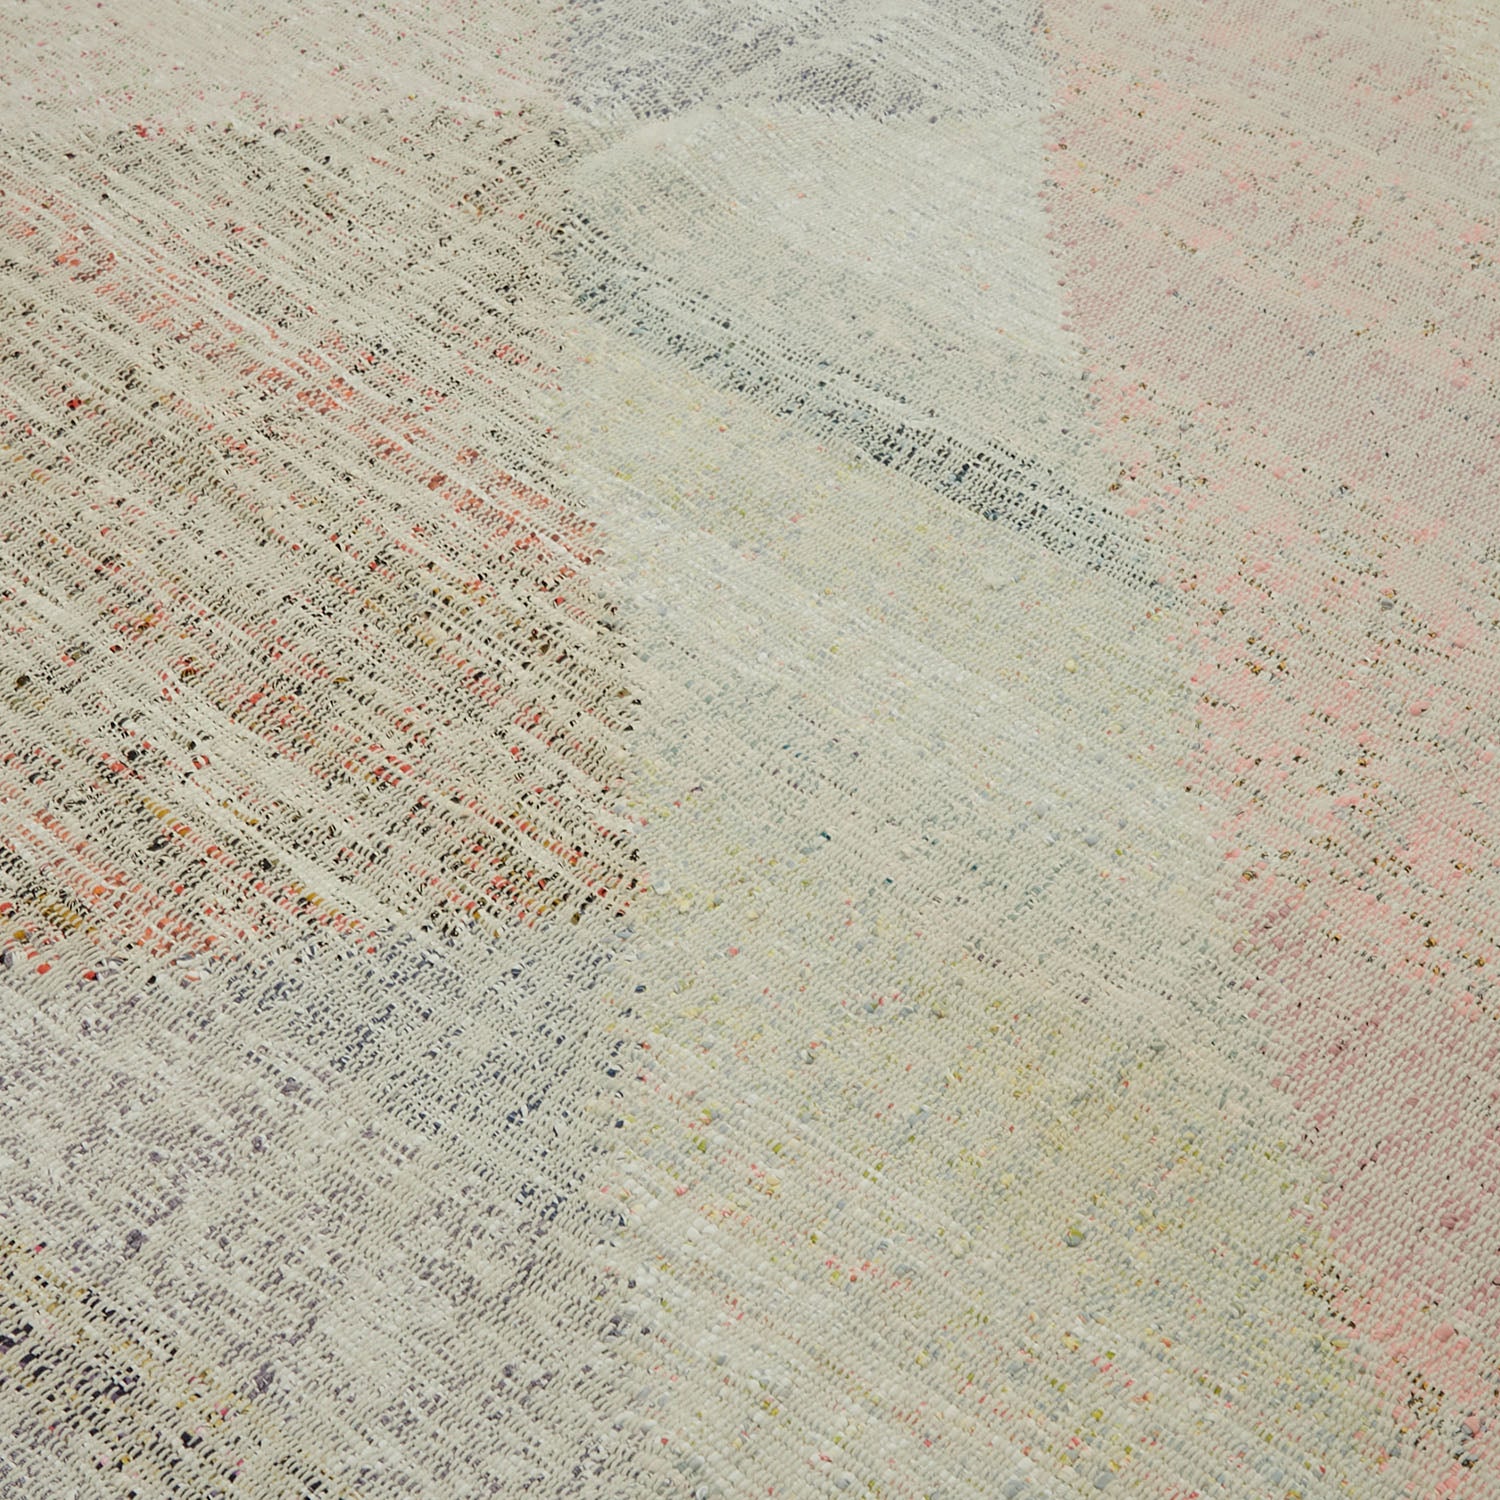 Close-up of a handwoven fabric with a vibrant, textured weave.